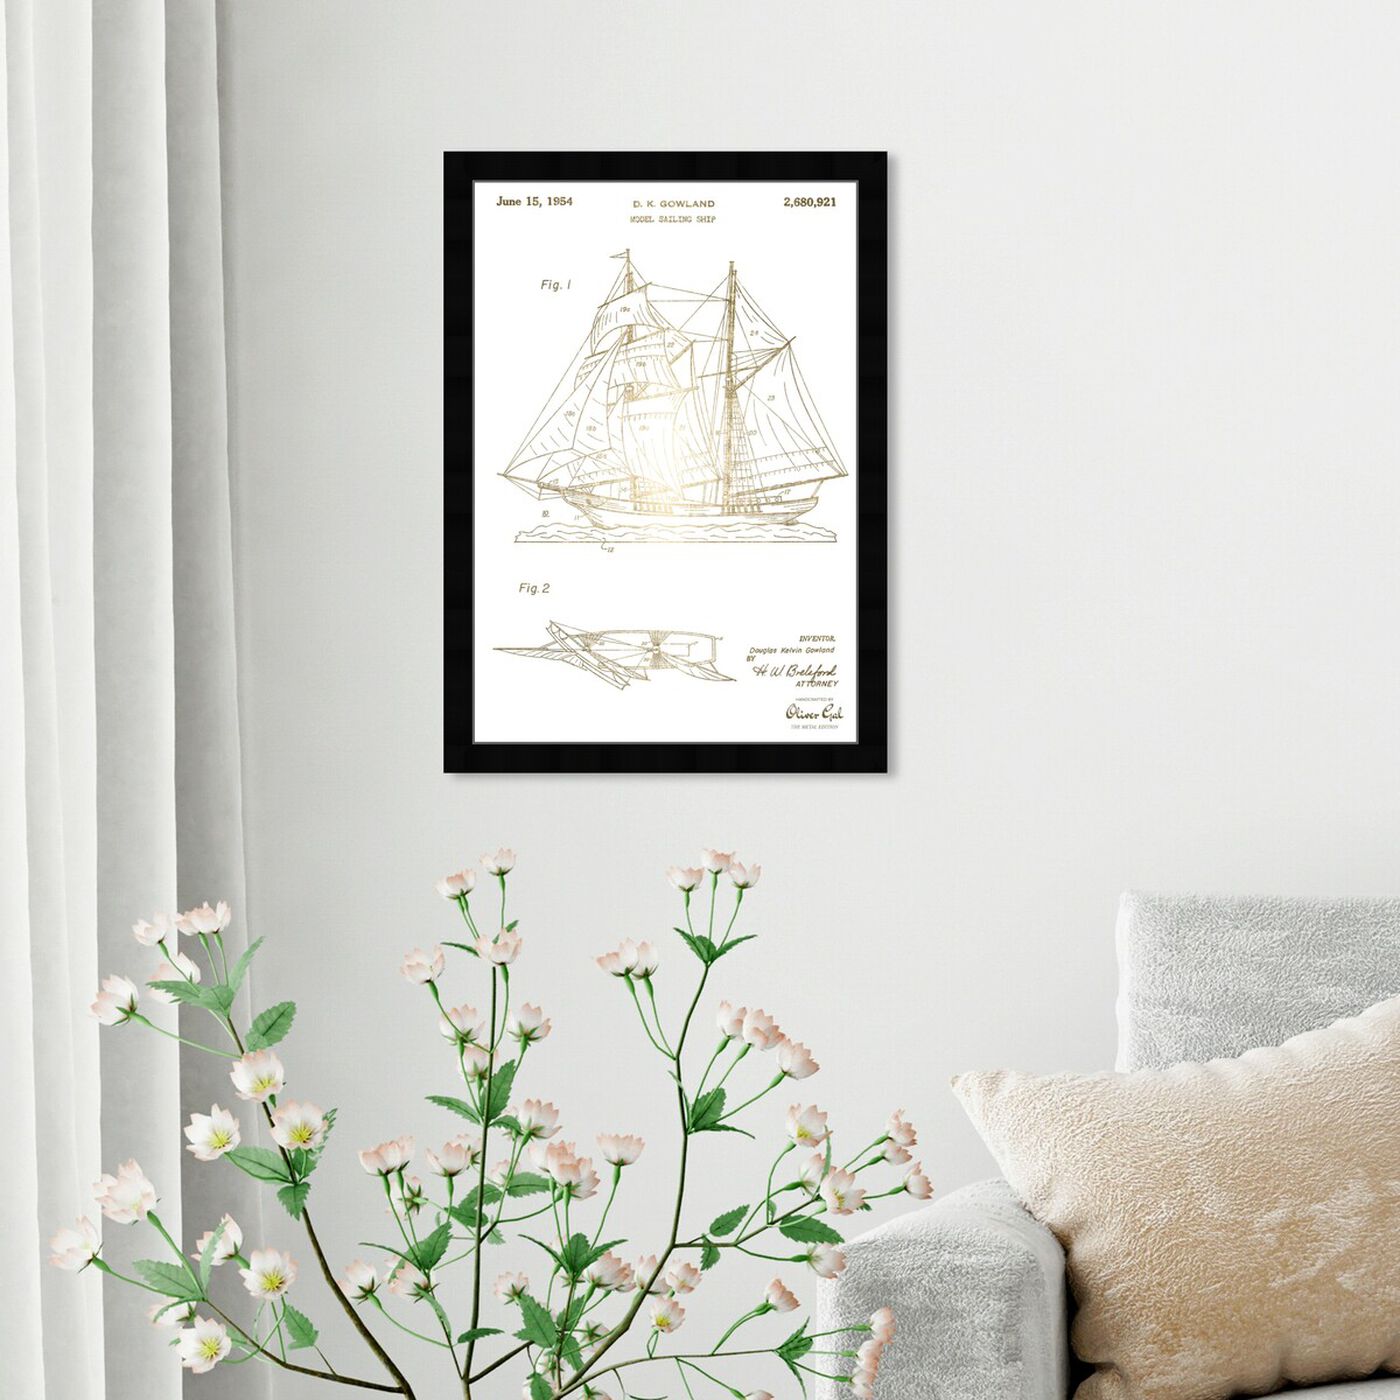 Hanging view of Model Sailing Ship 1954 I featuring transportation and boats and yachts art.